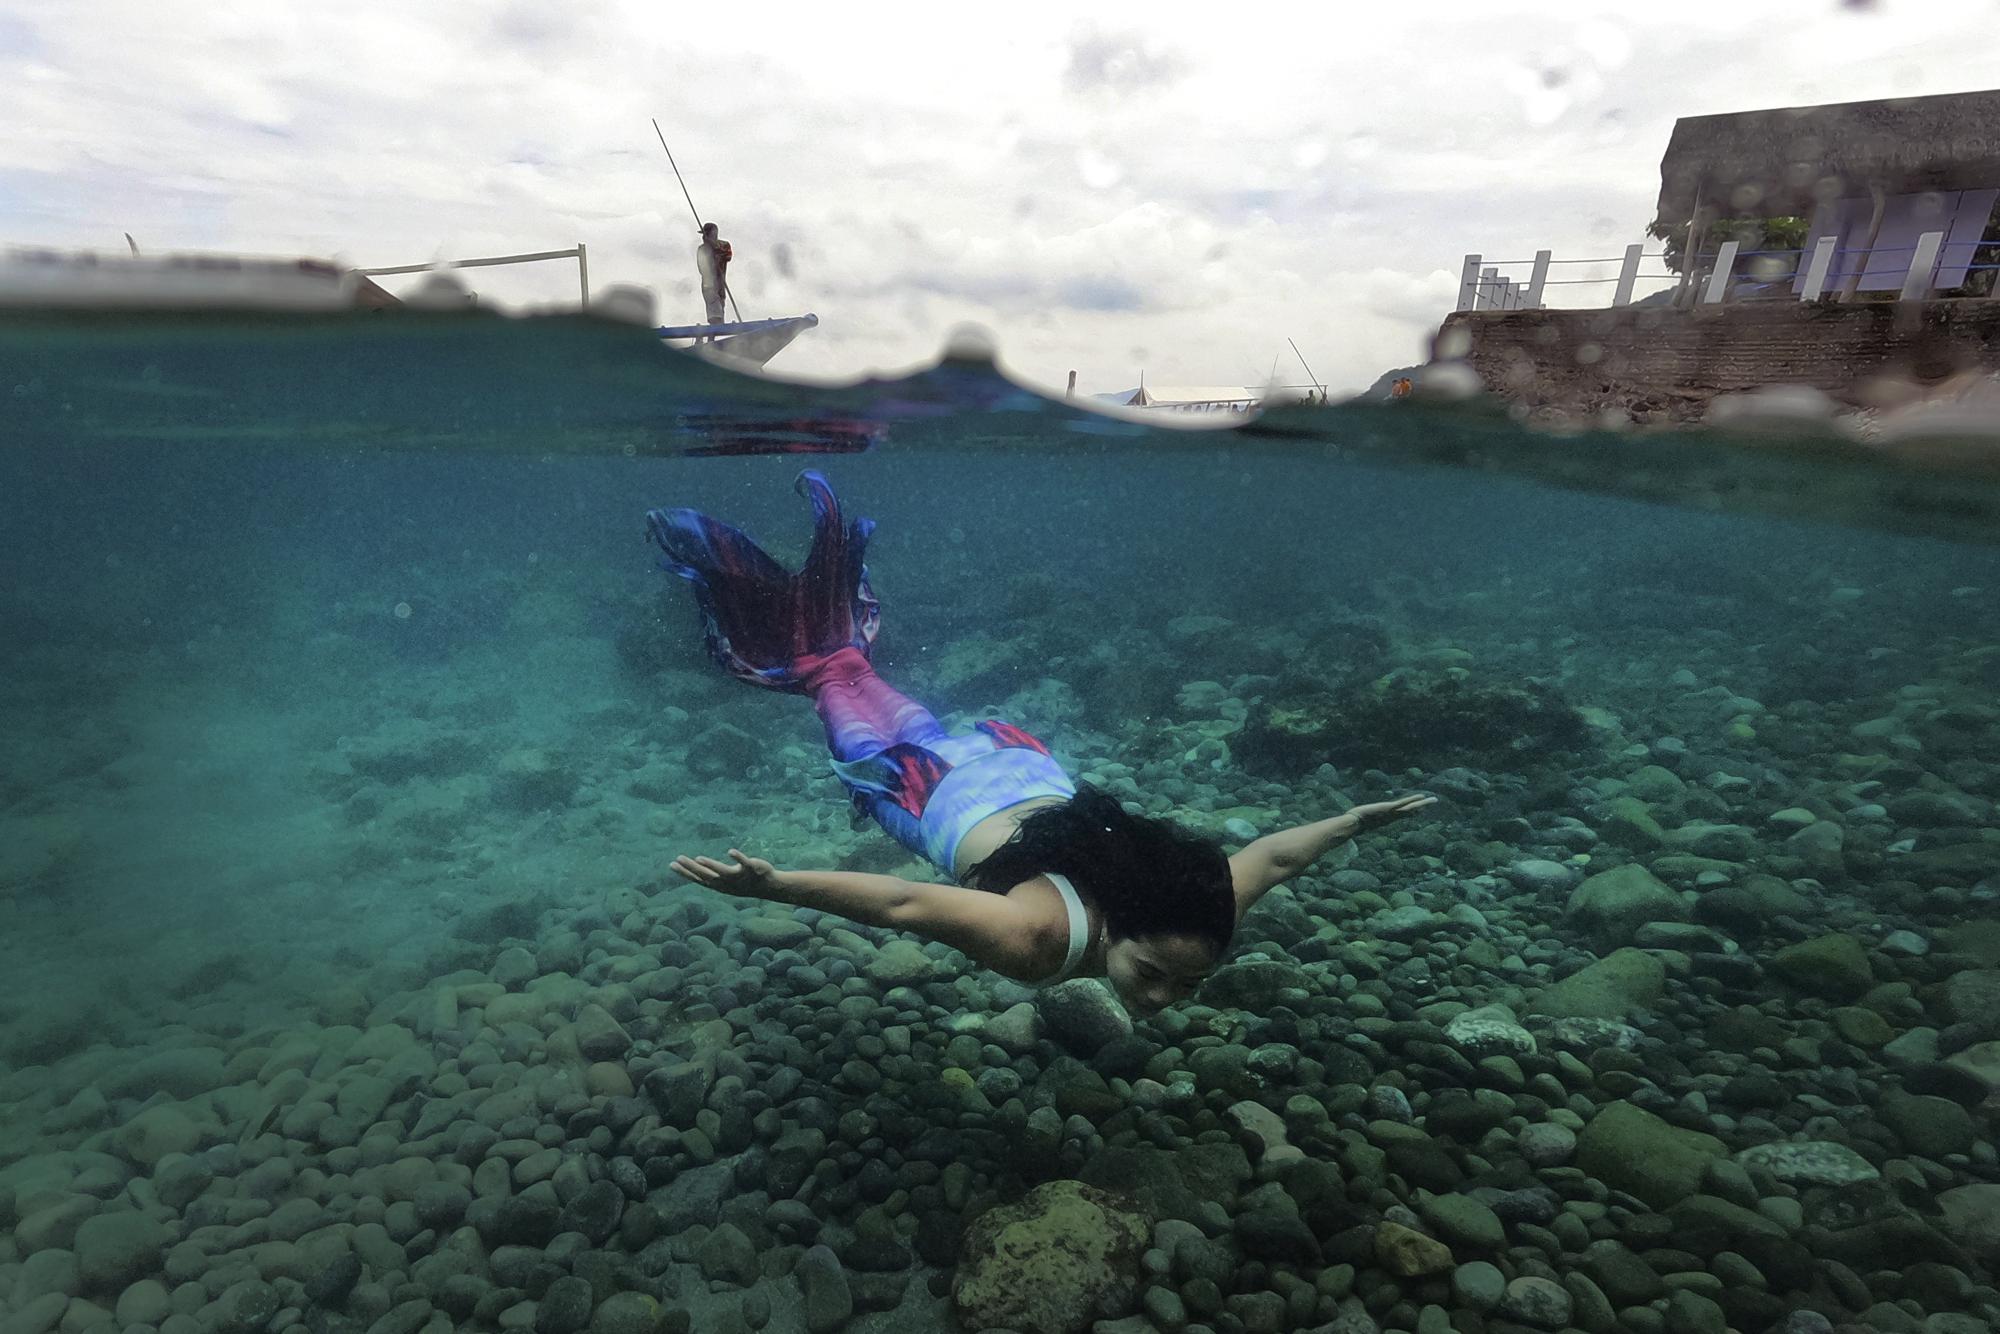 Filipina Jennica Secuya swims in her mermaid suit during a mermaiding class in Mabini, Batangas province, Philippines on Sunday, May 22, 2022. (AP Photo/Aaron Favila)